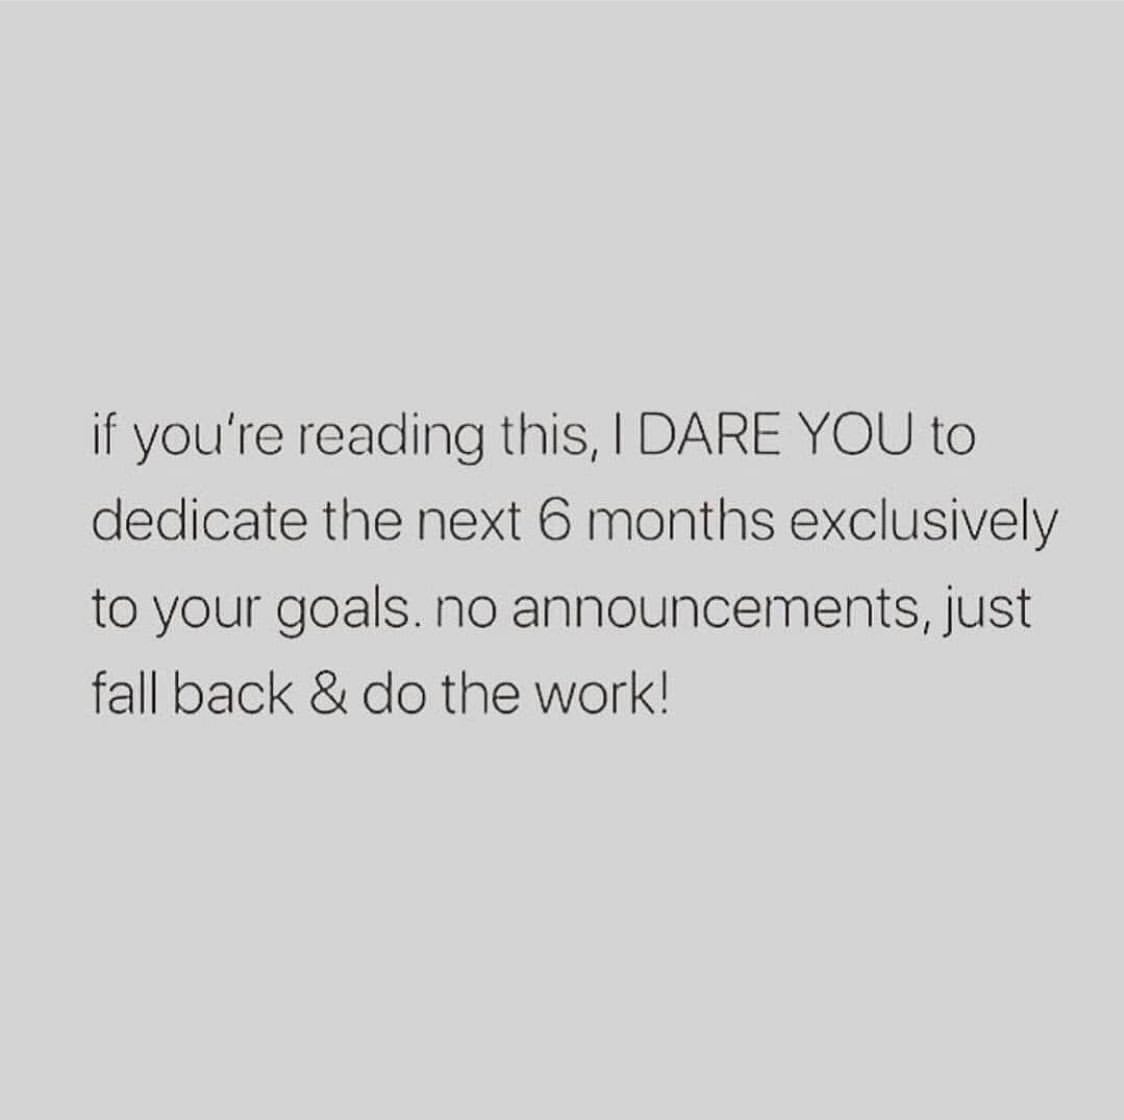 If you're reading this, I dare you to dedicate the next 6 months exclusively to your goals. No announcements, just fall back & do the work!